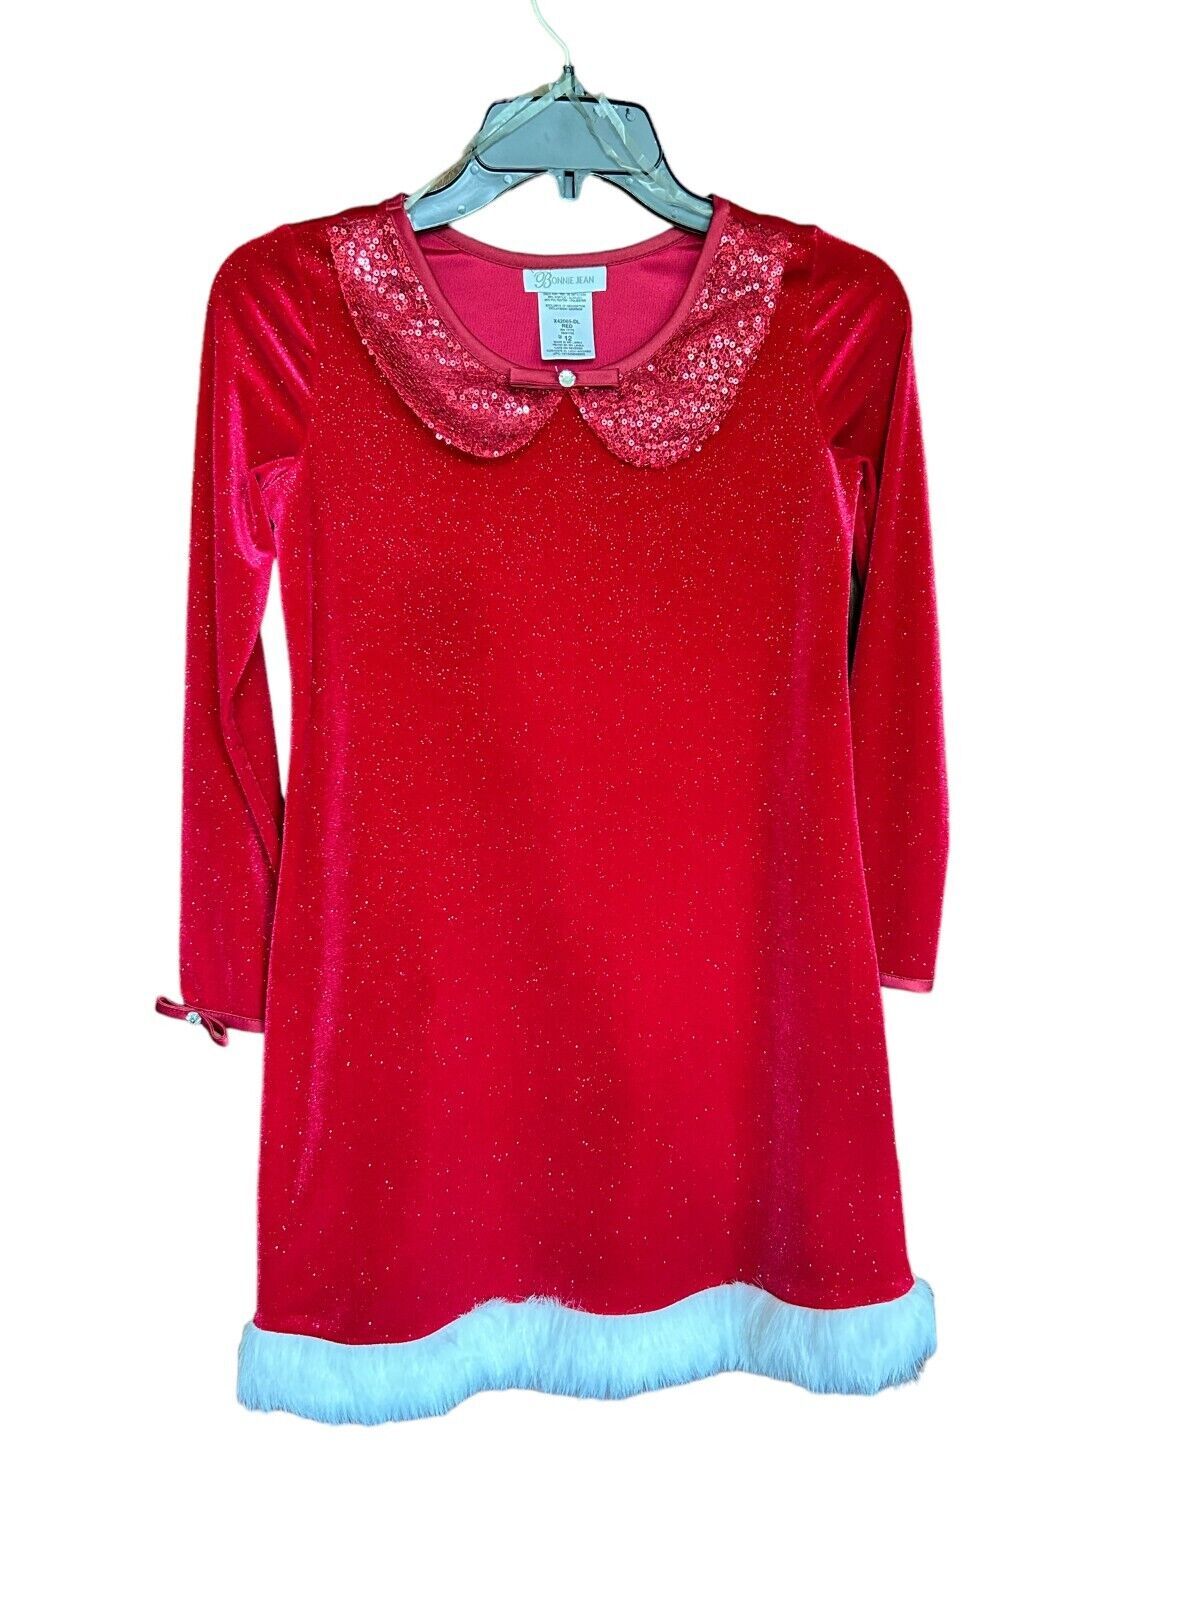 Bonnie Jean Dress Girls 12 Red Long Sleeve Christmas Sequin Collar Santa Outfit - $26.17